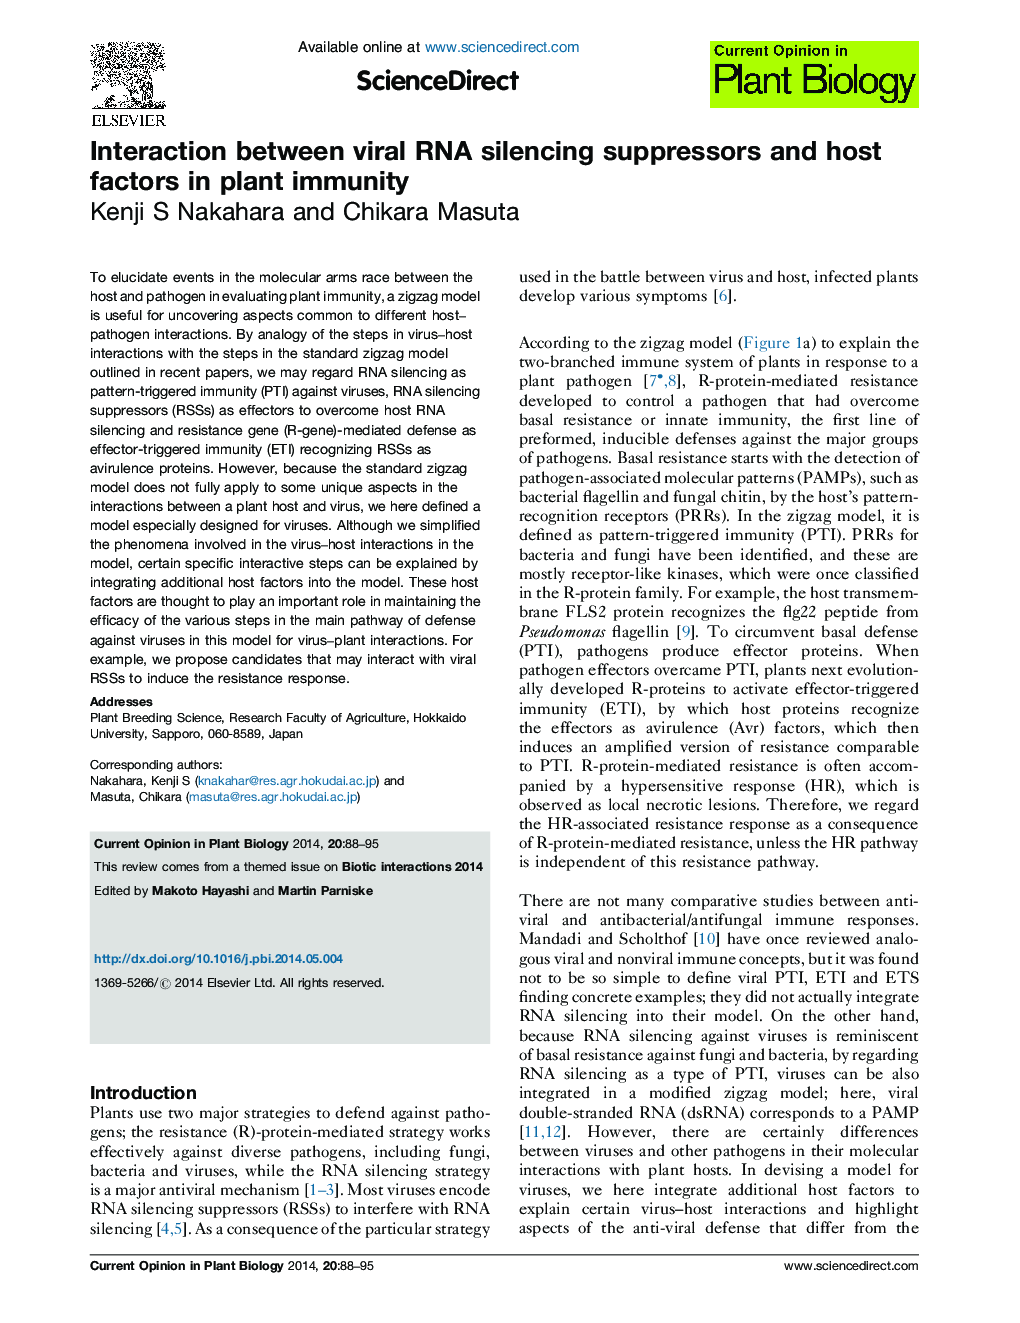 Interaction between viral RNA silencing suppressors and host factors in plant immunity